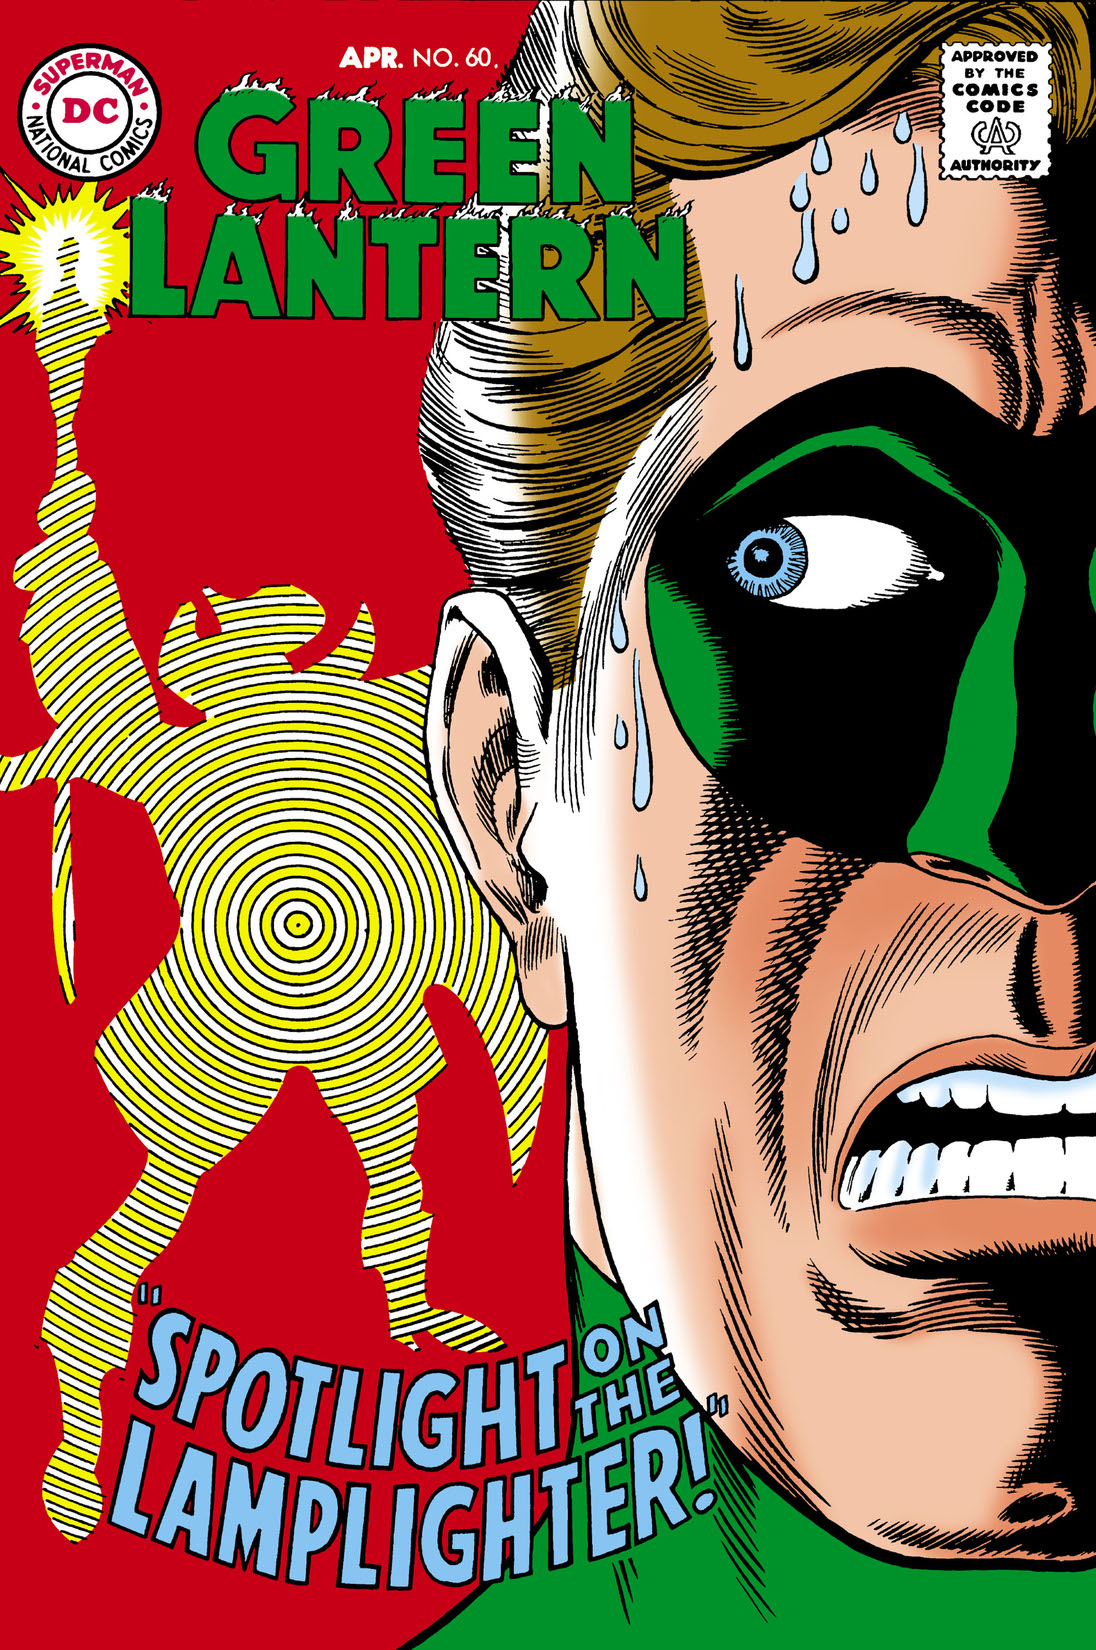 Green Lantern (1960-) #60 preview images